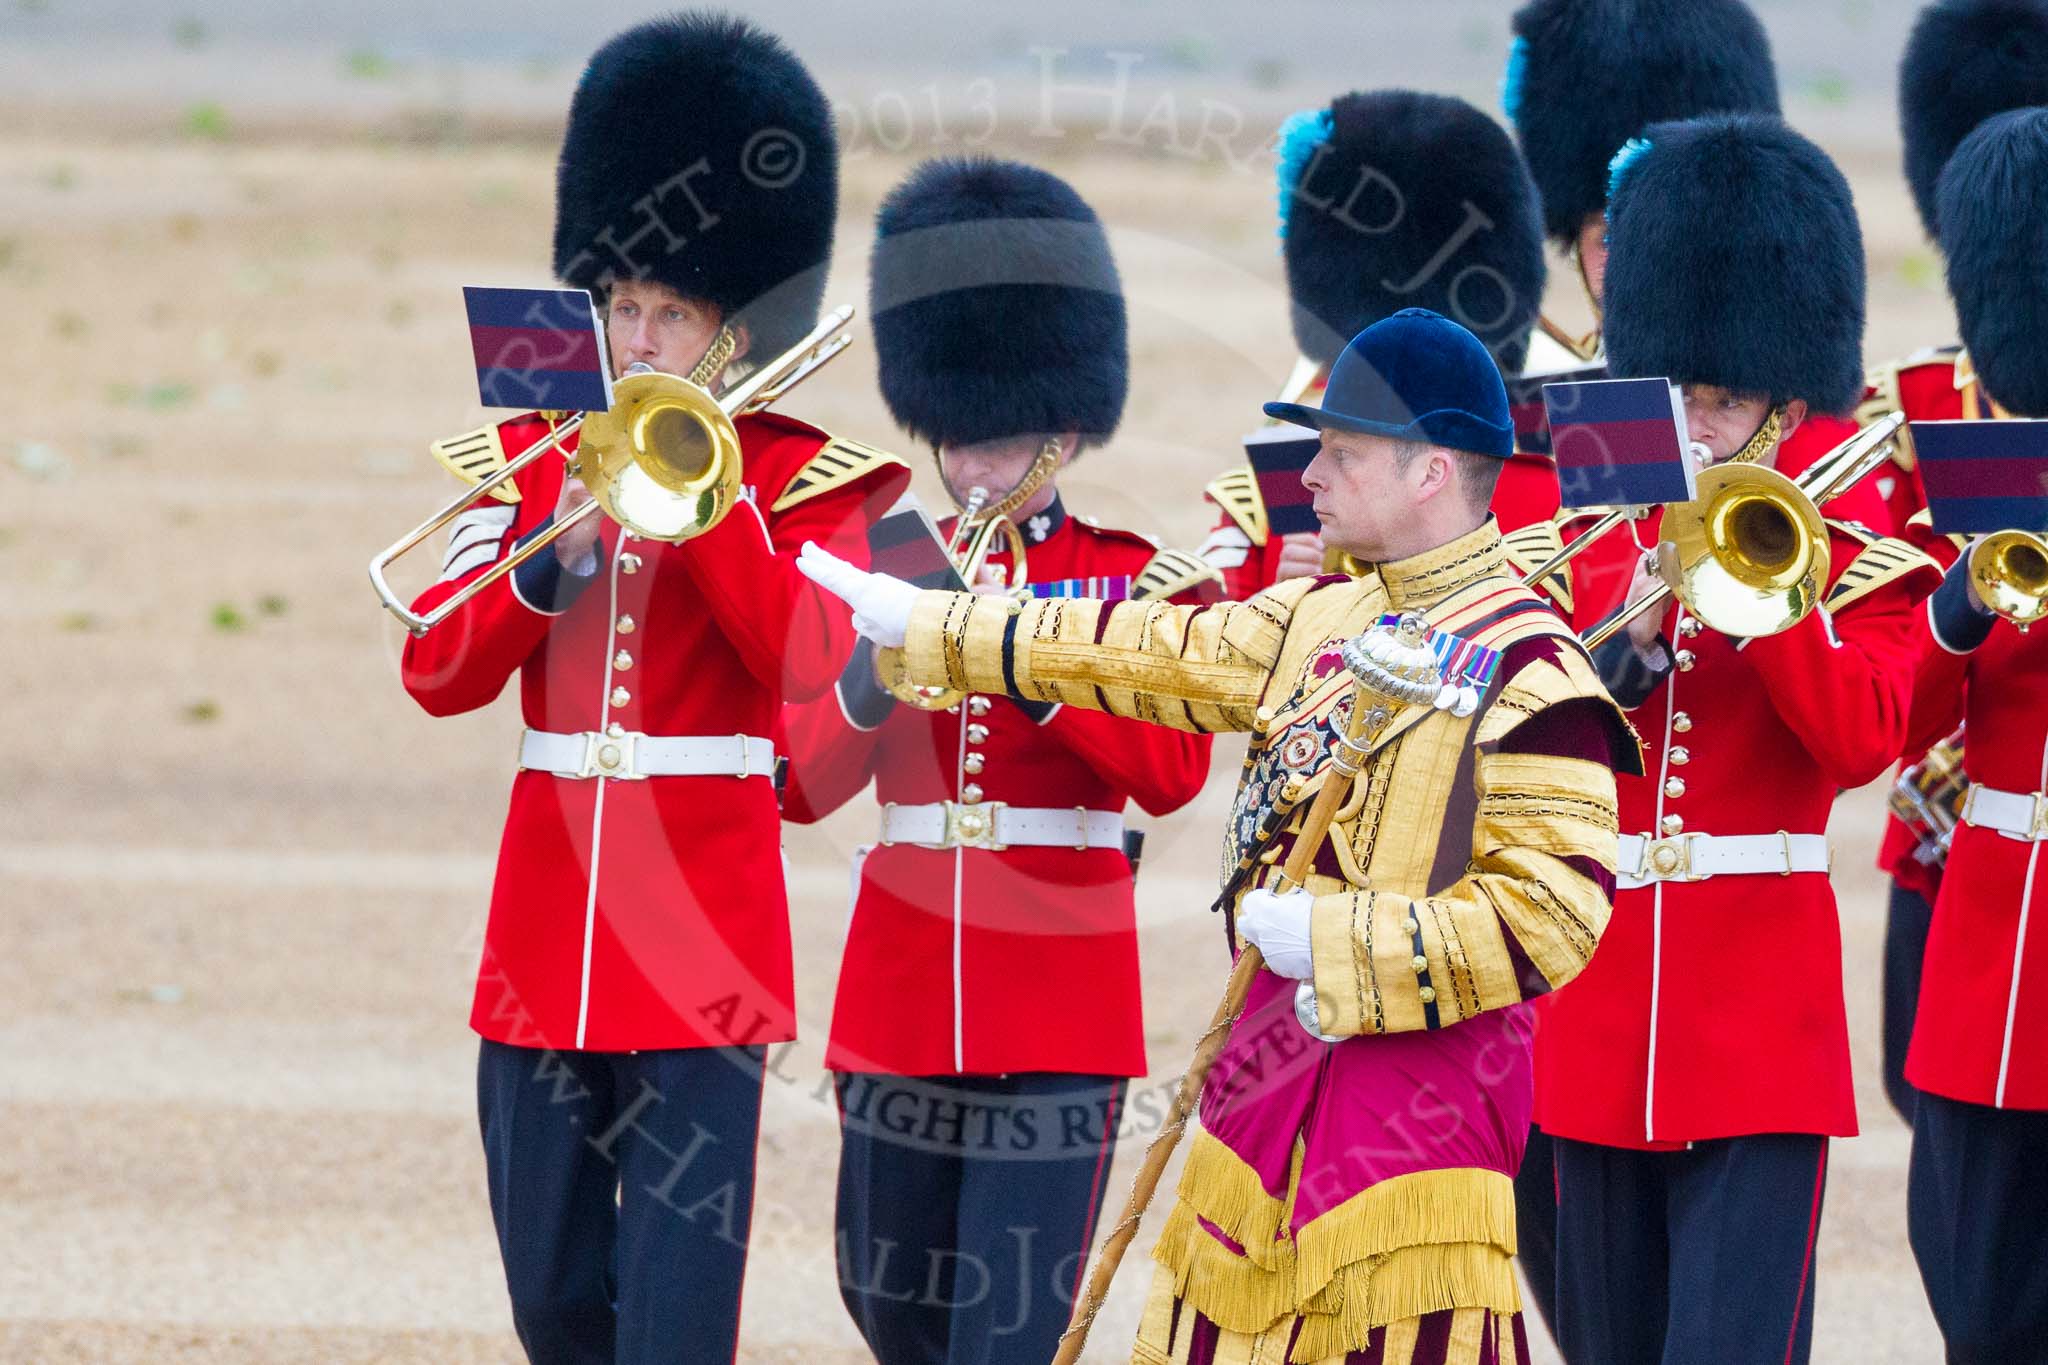 Trooping the Colour 2015. Image #49, 13 June 2015 10:14 Horse Guards Parade, London, UK